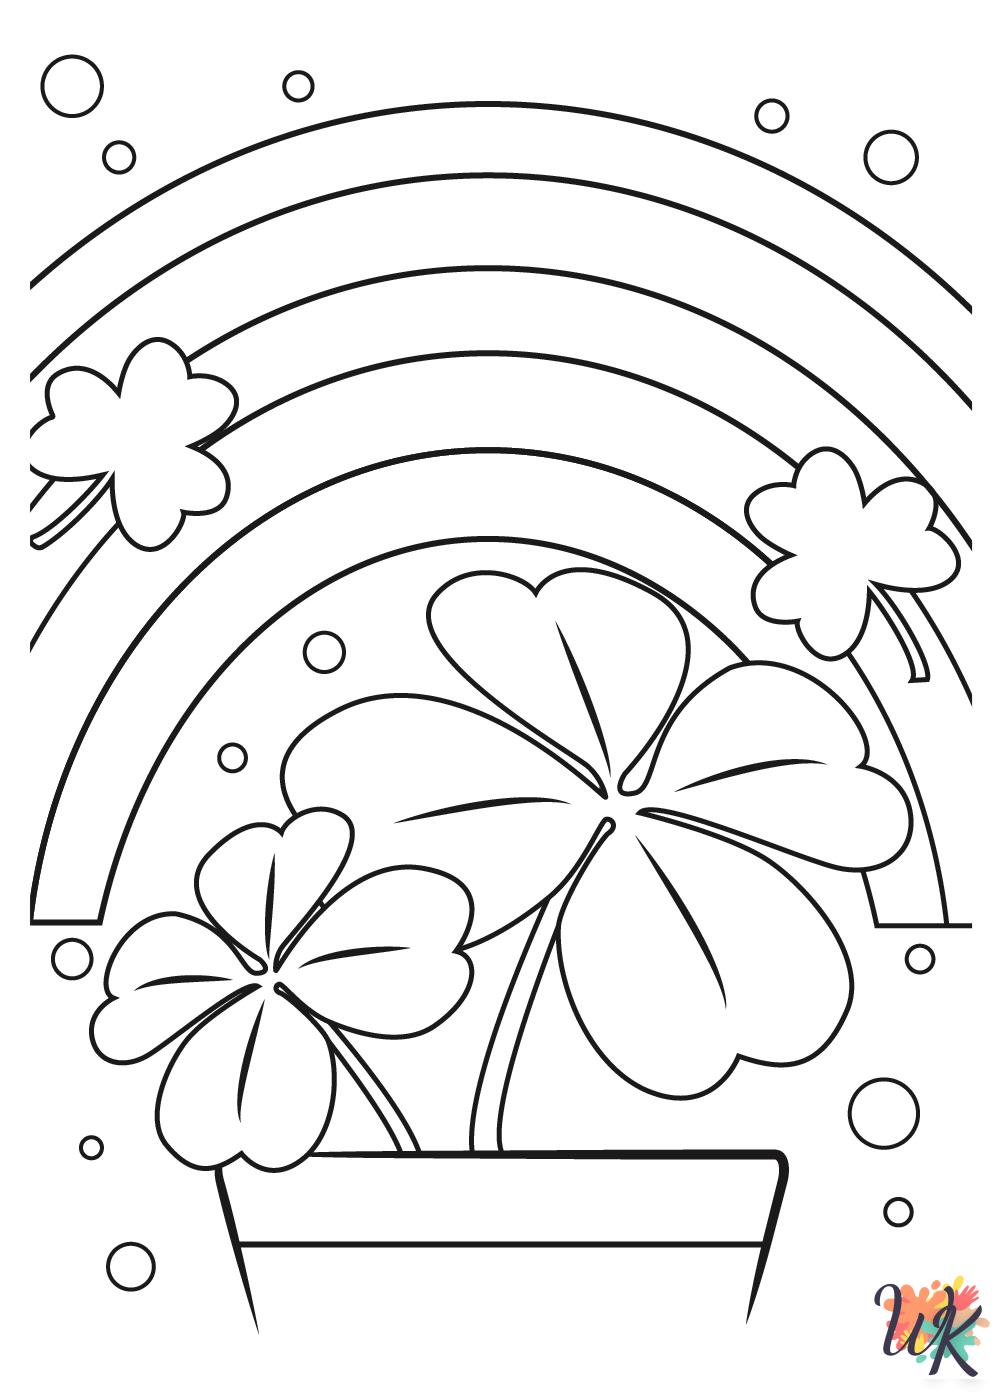 Shamrock coloring pages for adults pdf